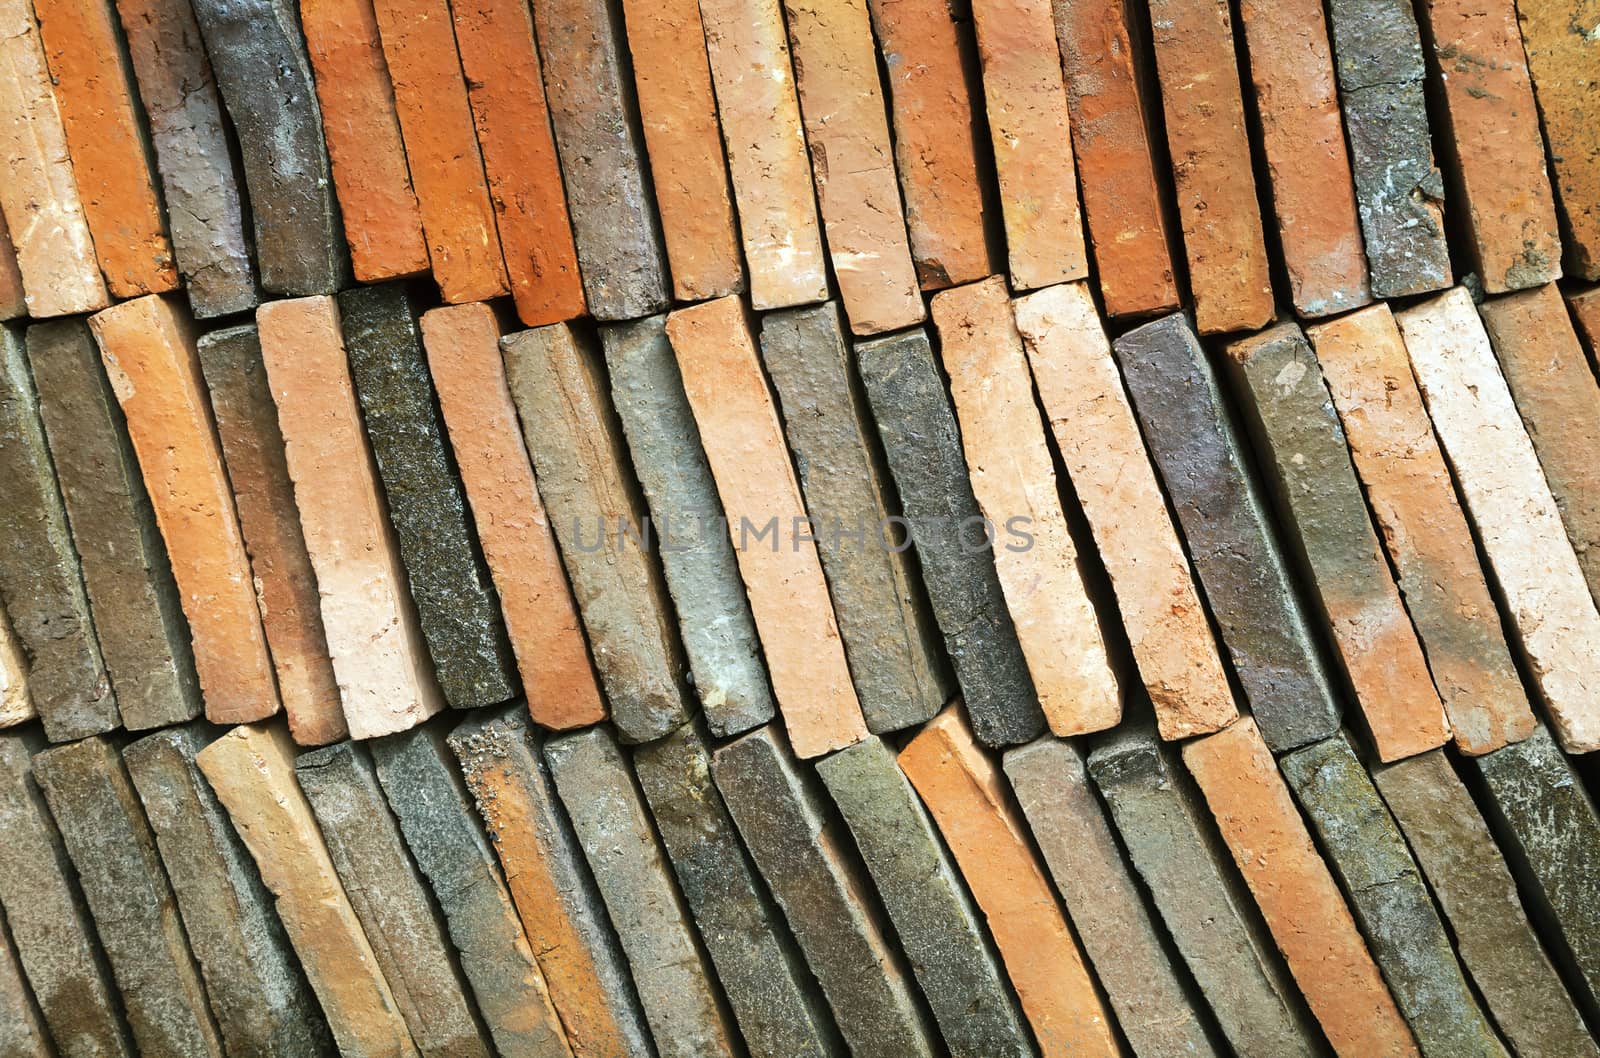 Background of old clay tiles in a pile by Goodday